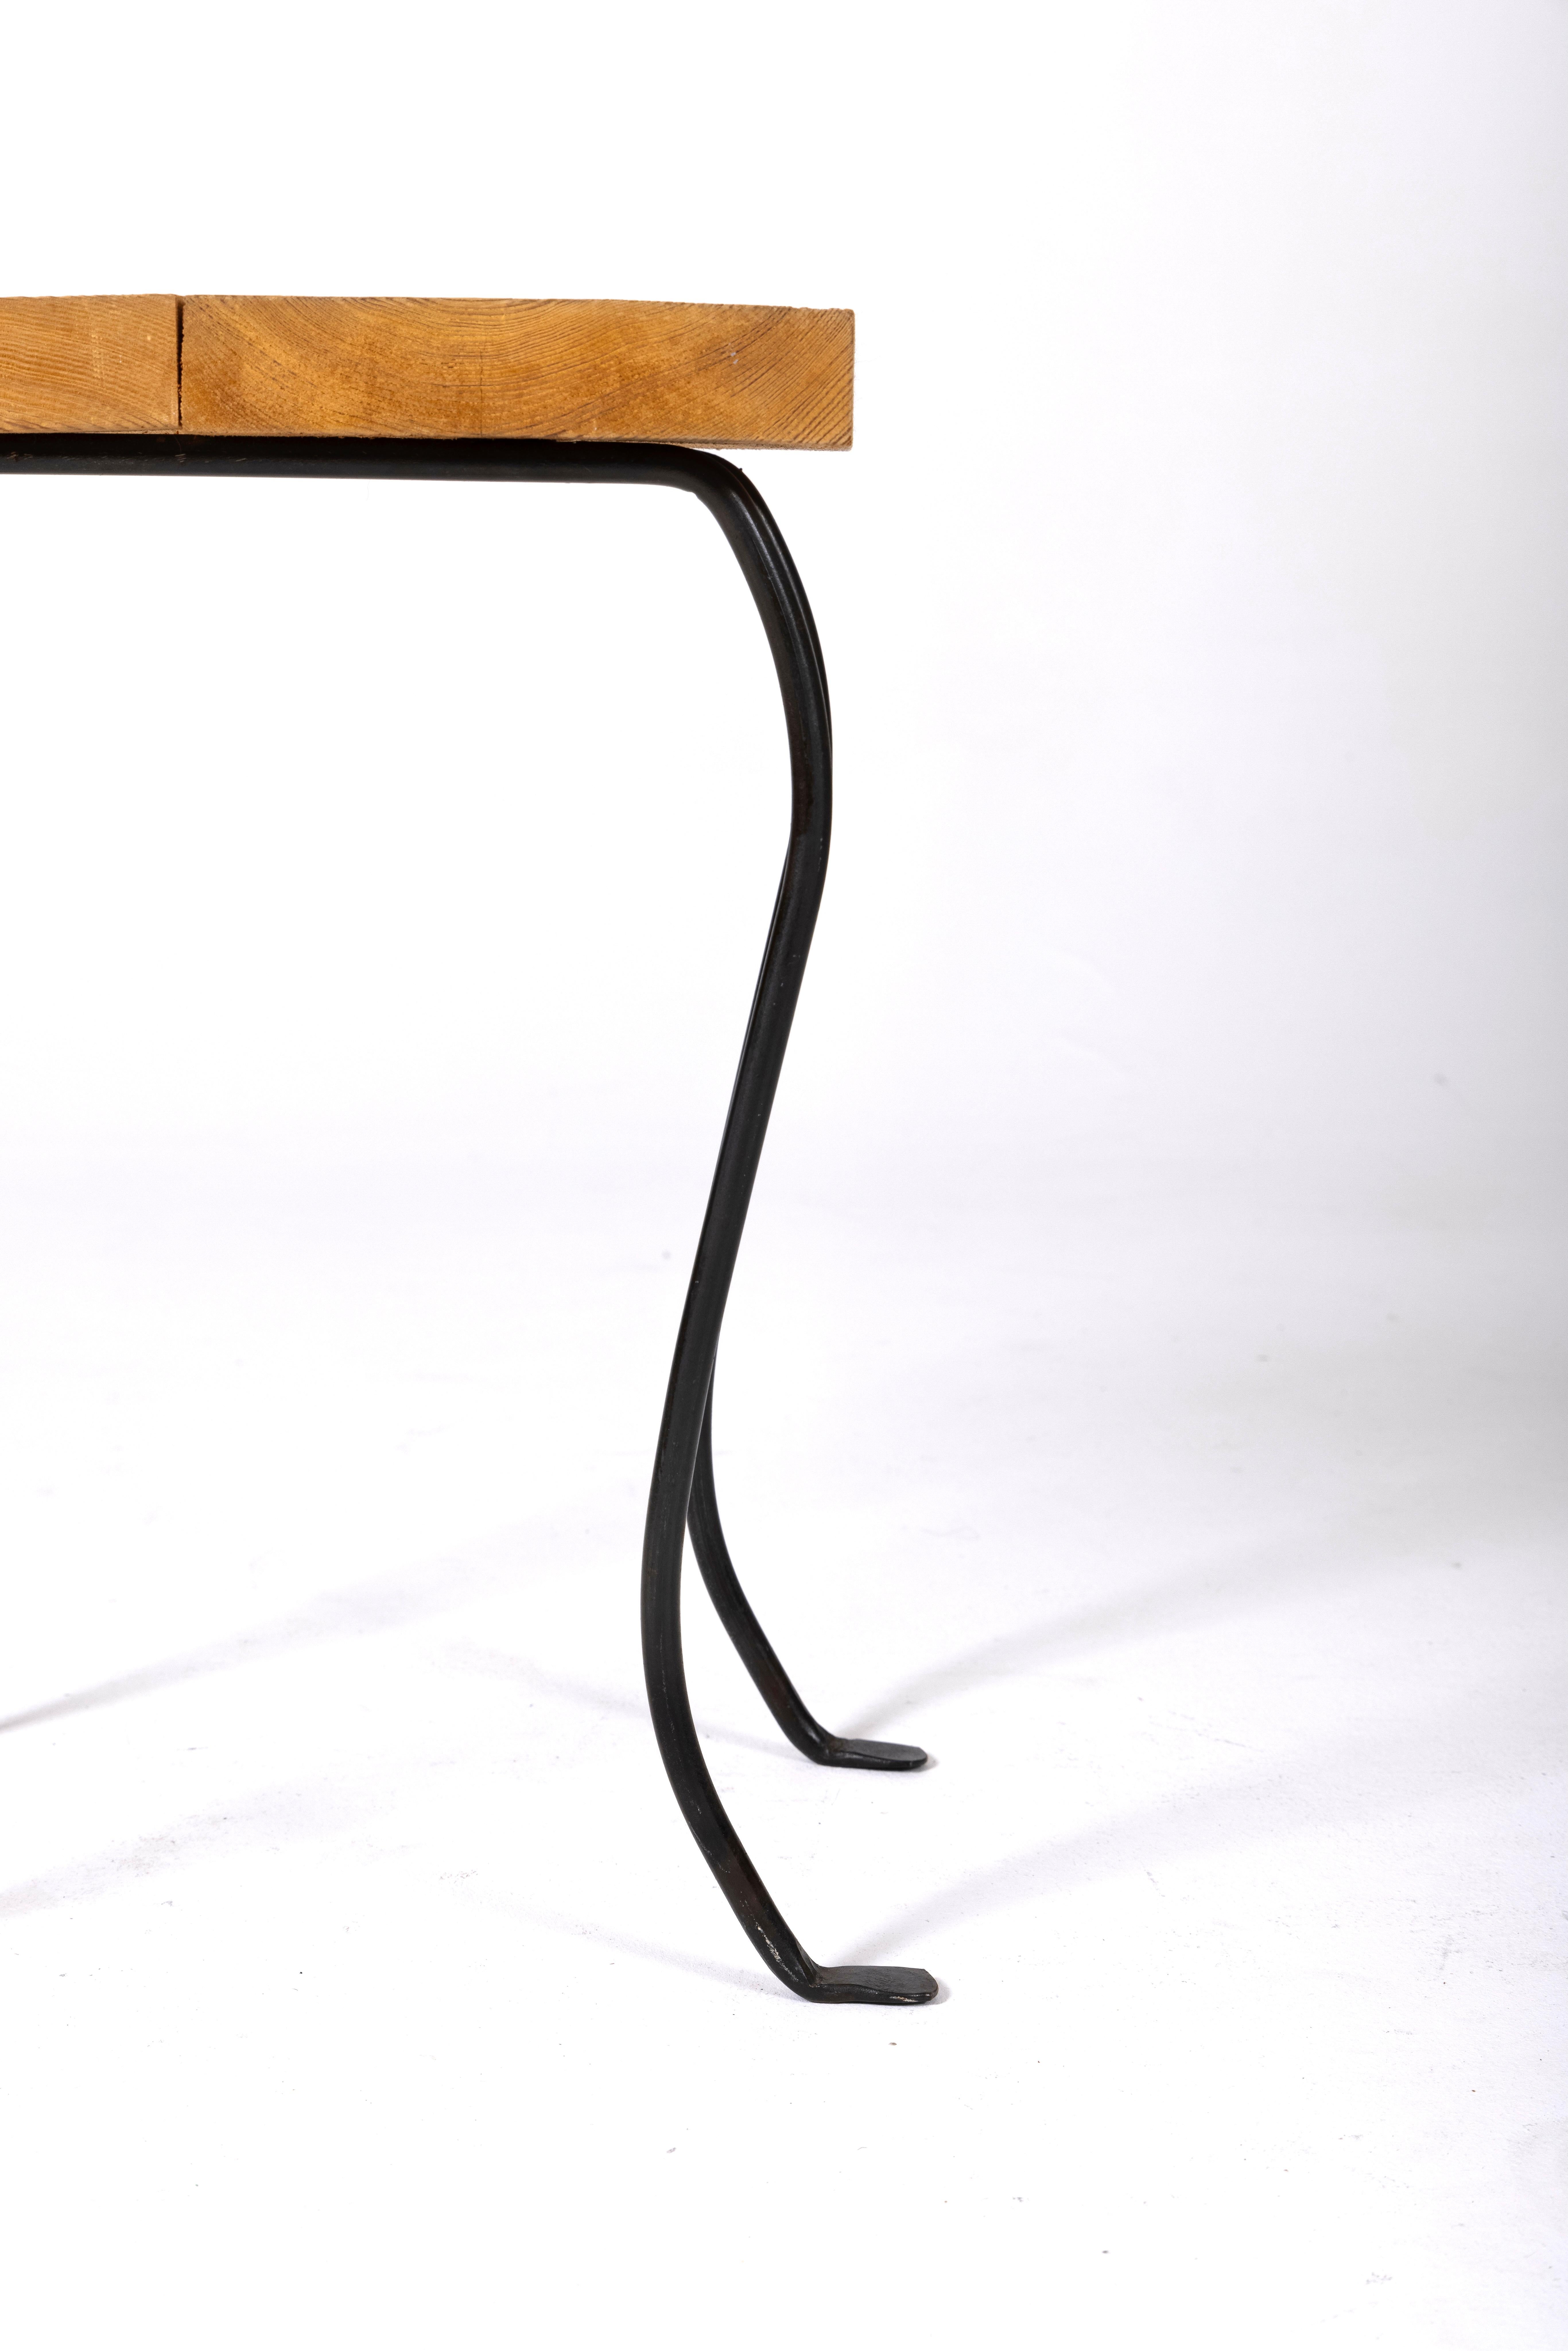 Wood and metal chair by Patrice Gruffaz For Sale 6